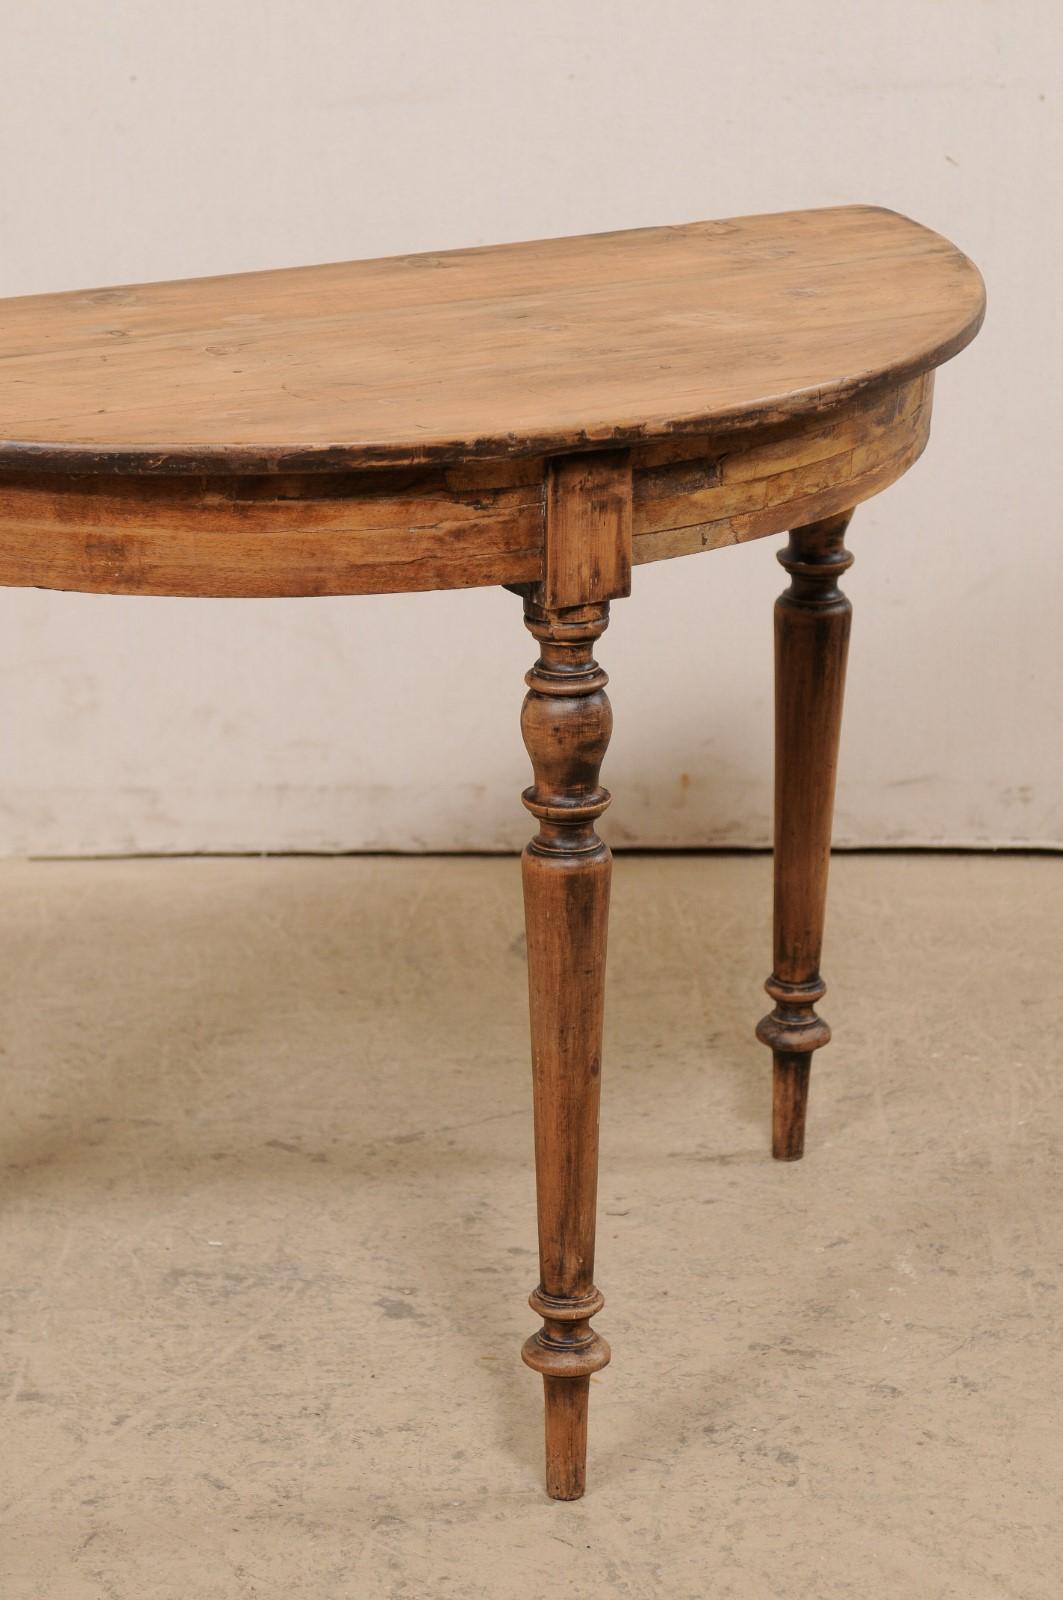 Wood Swedish Demi-Lune Console Table with Rounded Apron and Turned Legs, 19th C. 